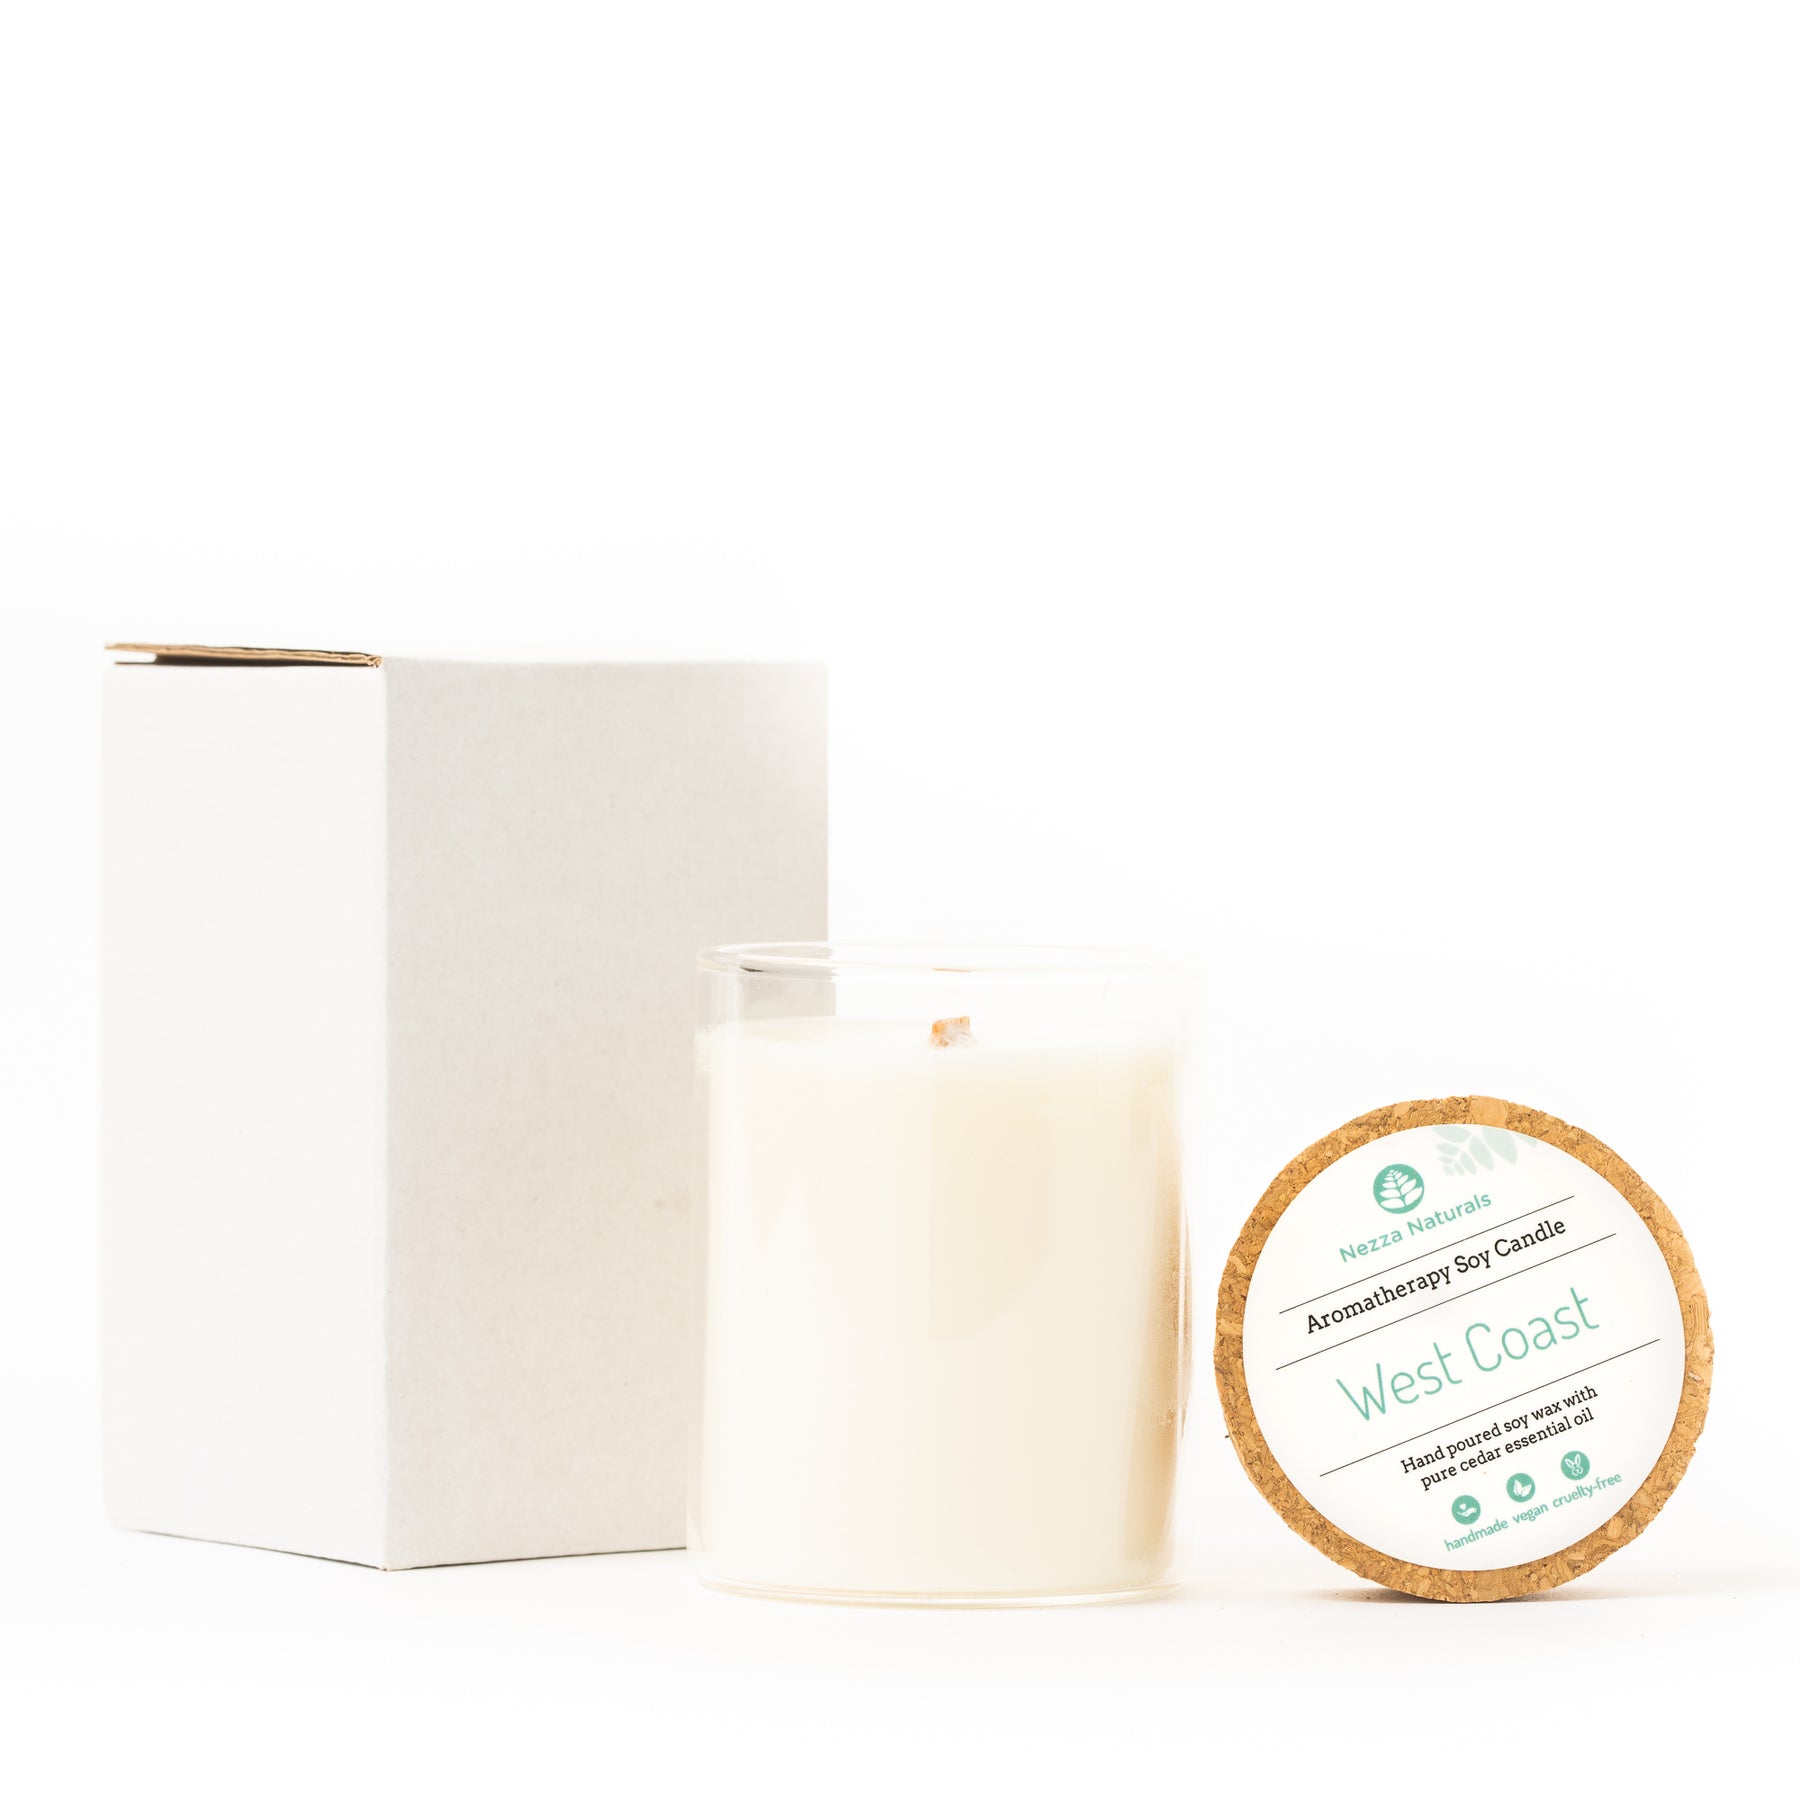 Aromatherapy Soy Candle in West Coast